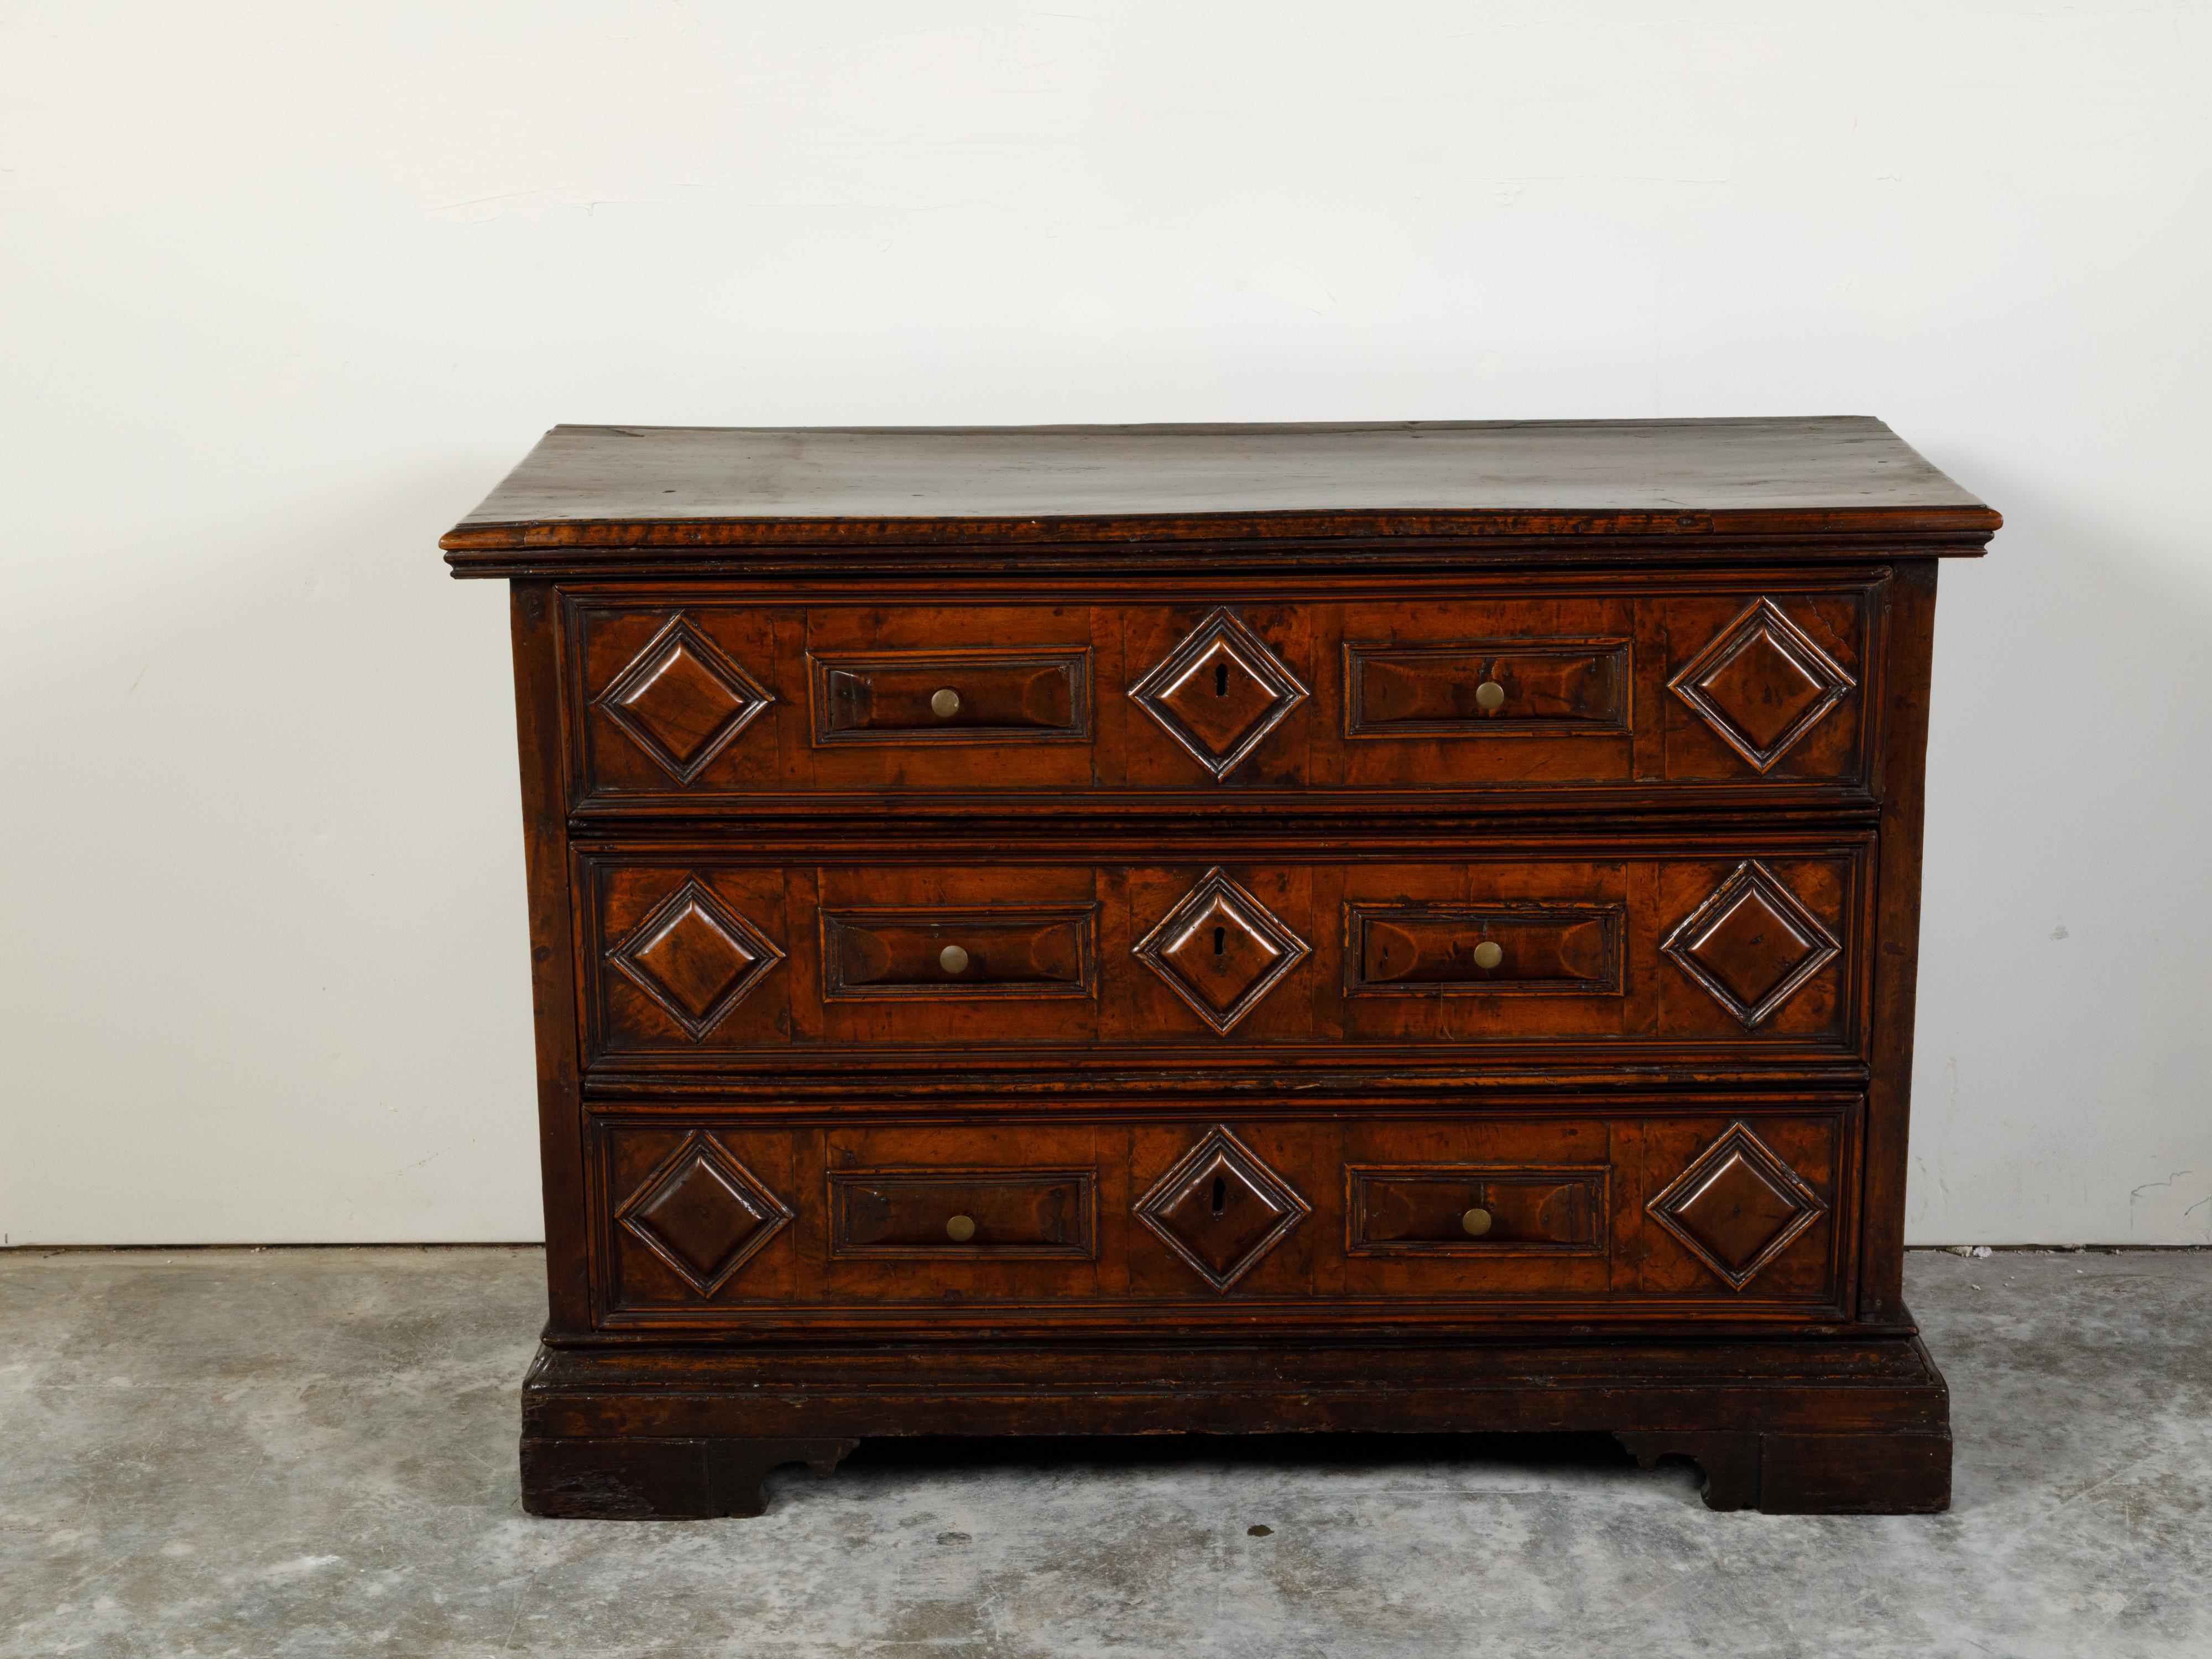 An Italian walnut commode from the early 19th century, with three drawers and raised diamond motifs. Created in Italy during the early years of the 19th century, this walnut commode features a rectangular top sitting above three drawers each adorned